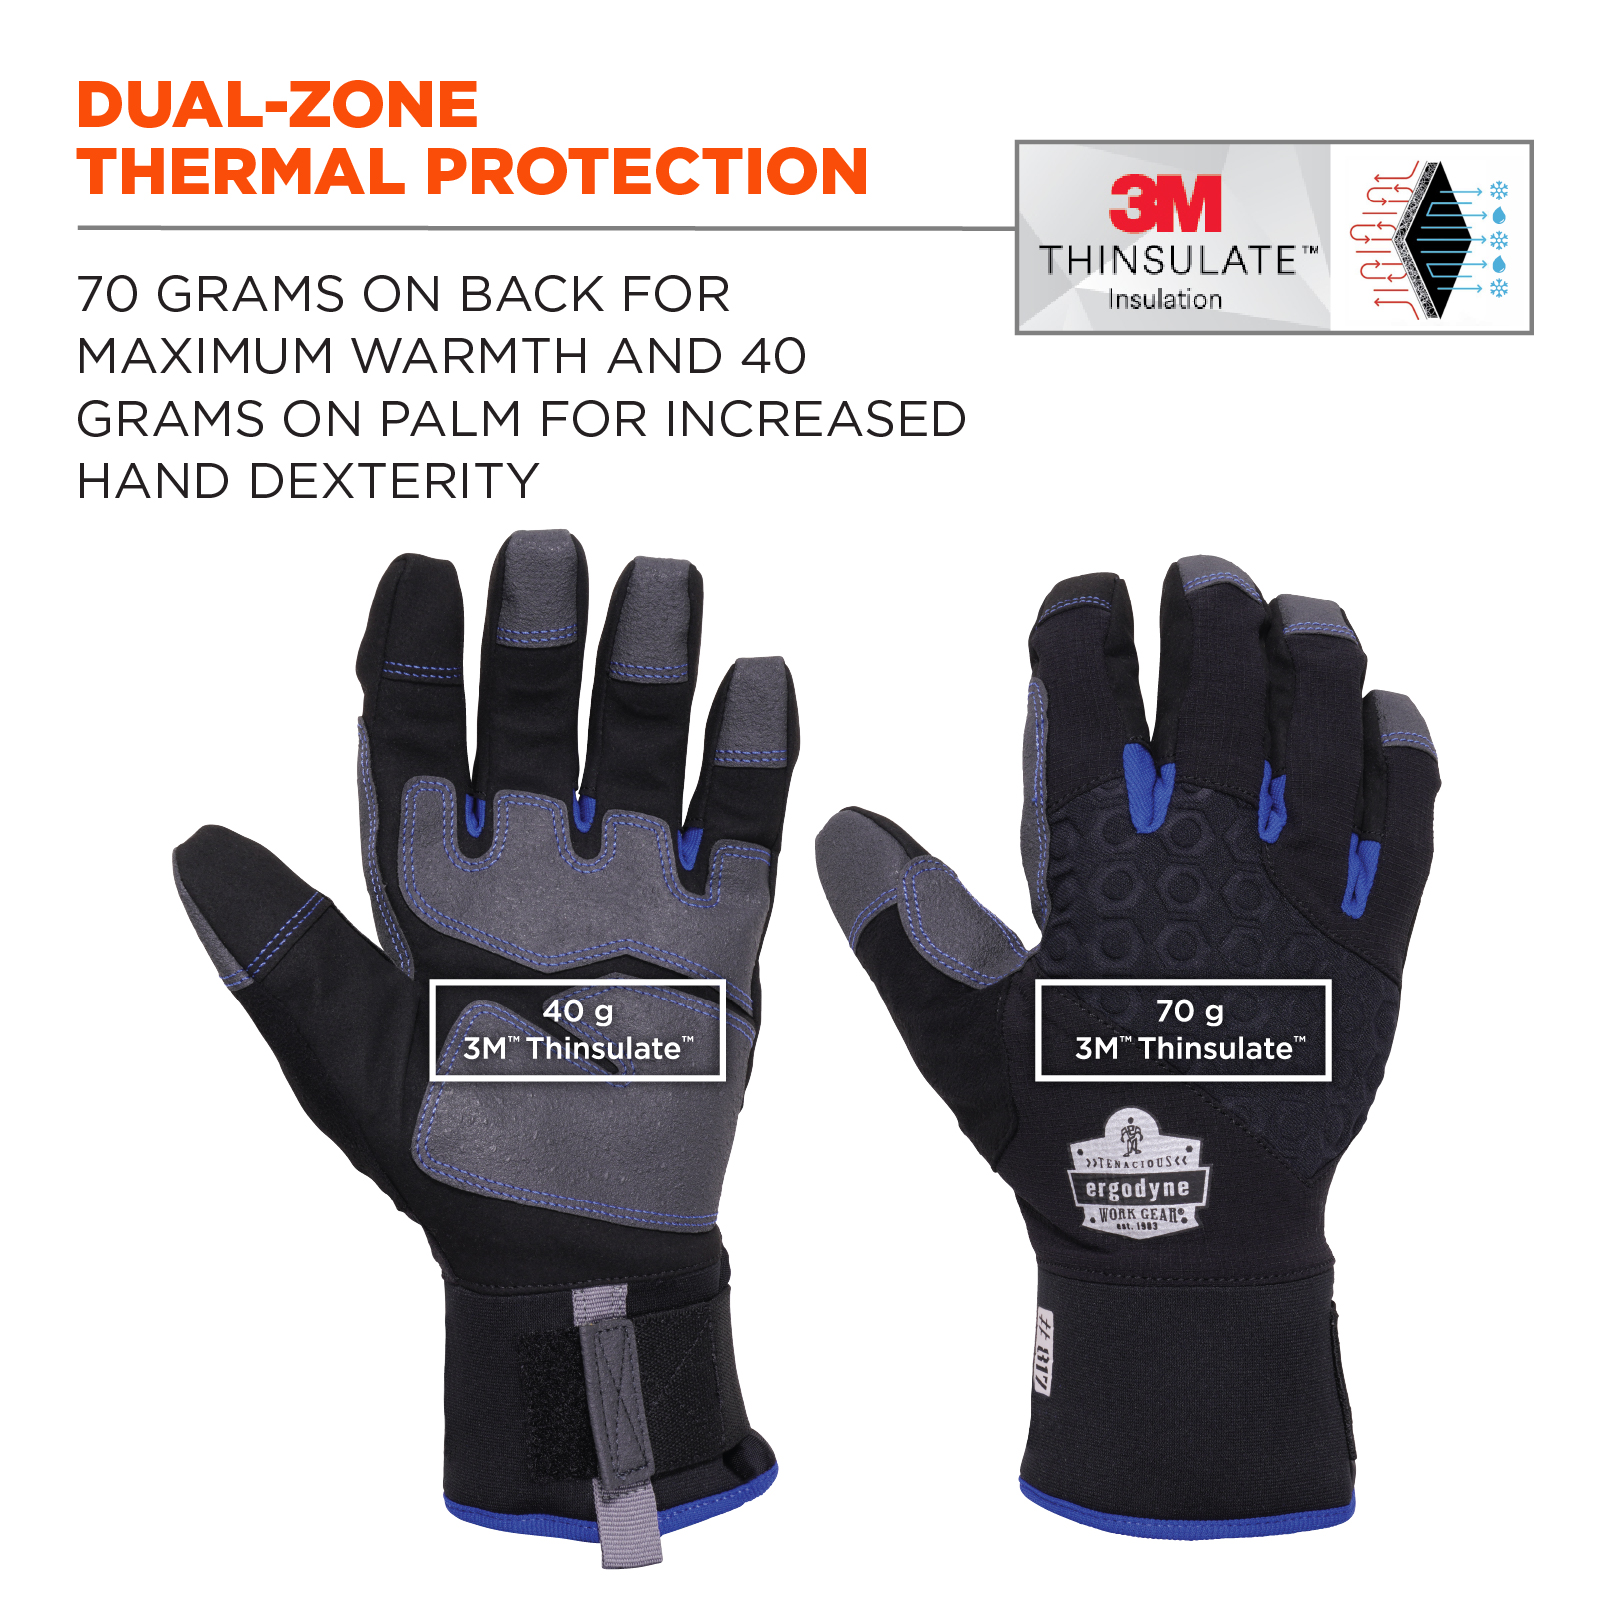 https://www.ergodyne.com/sites/default/files/product-images/17352-817-thermal-winter-work-gloves-black-dual-zone-thermal-protection.jpg